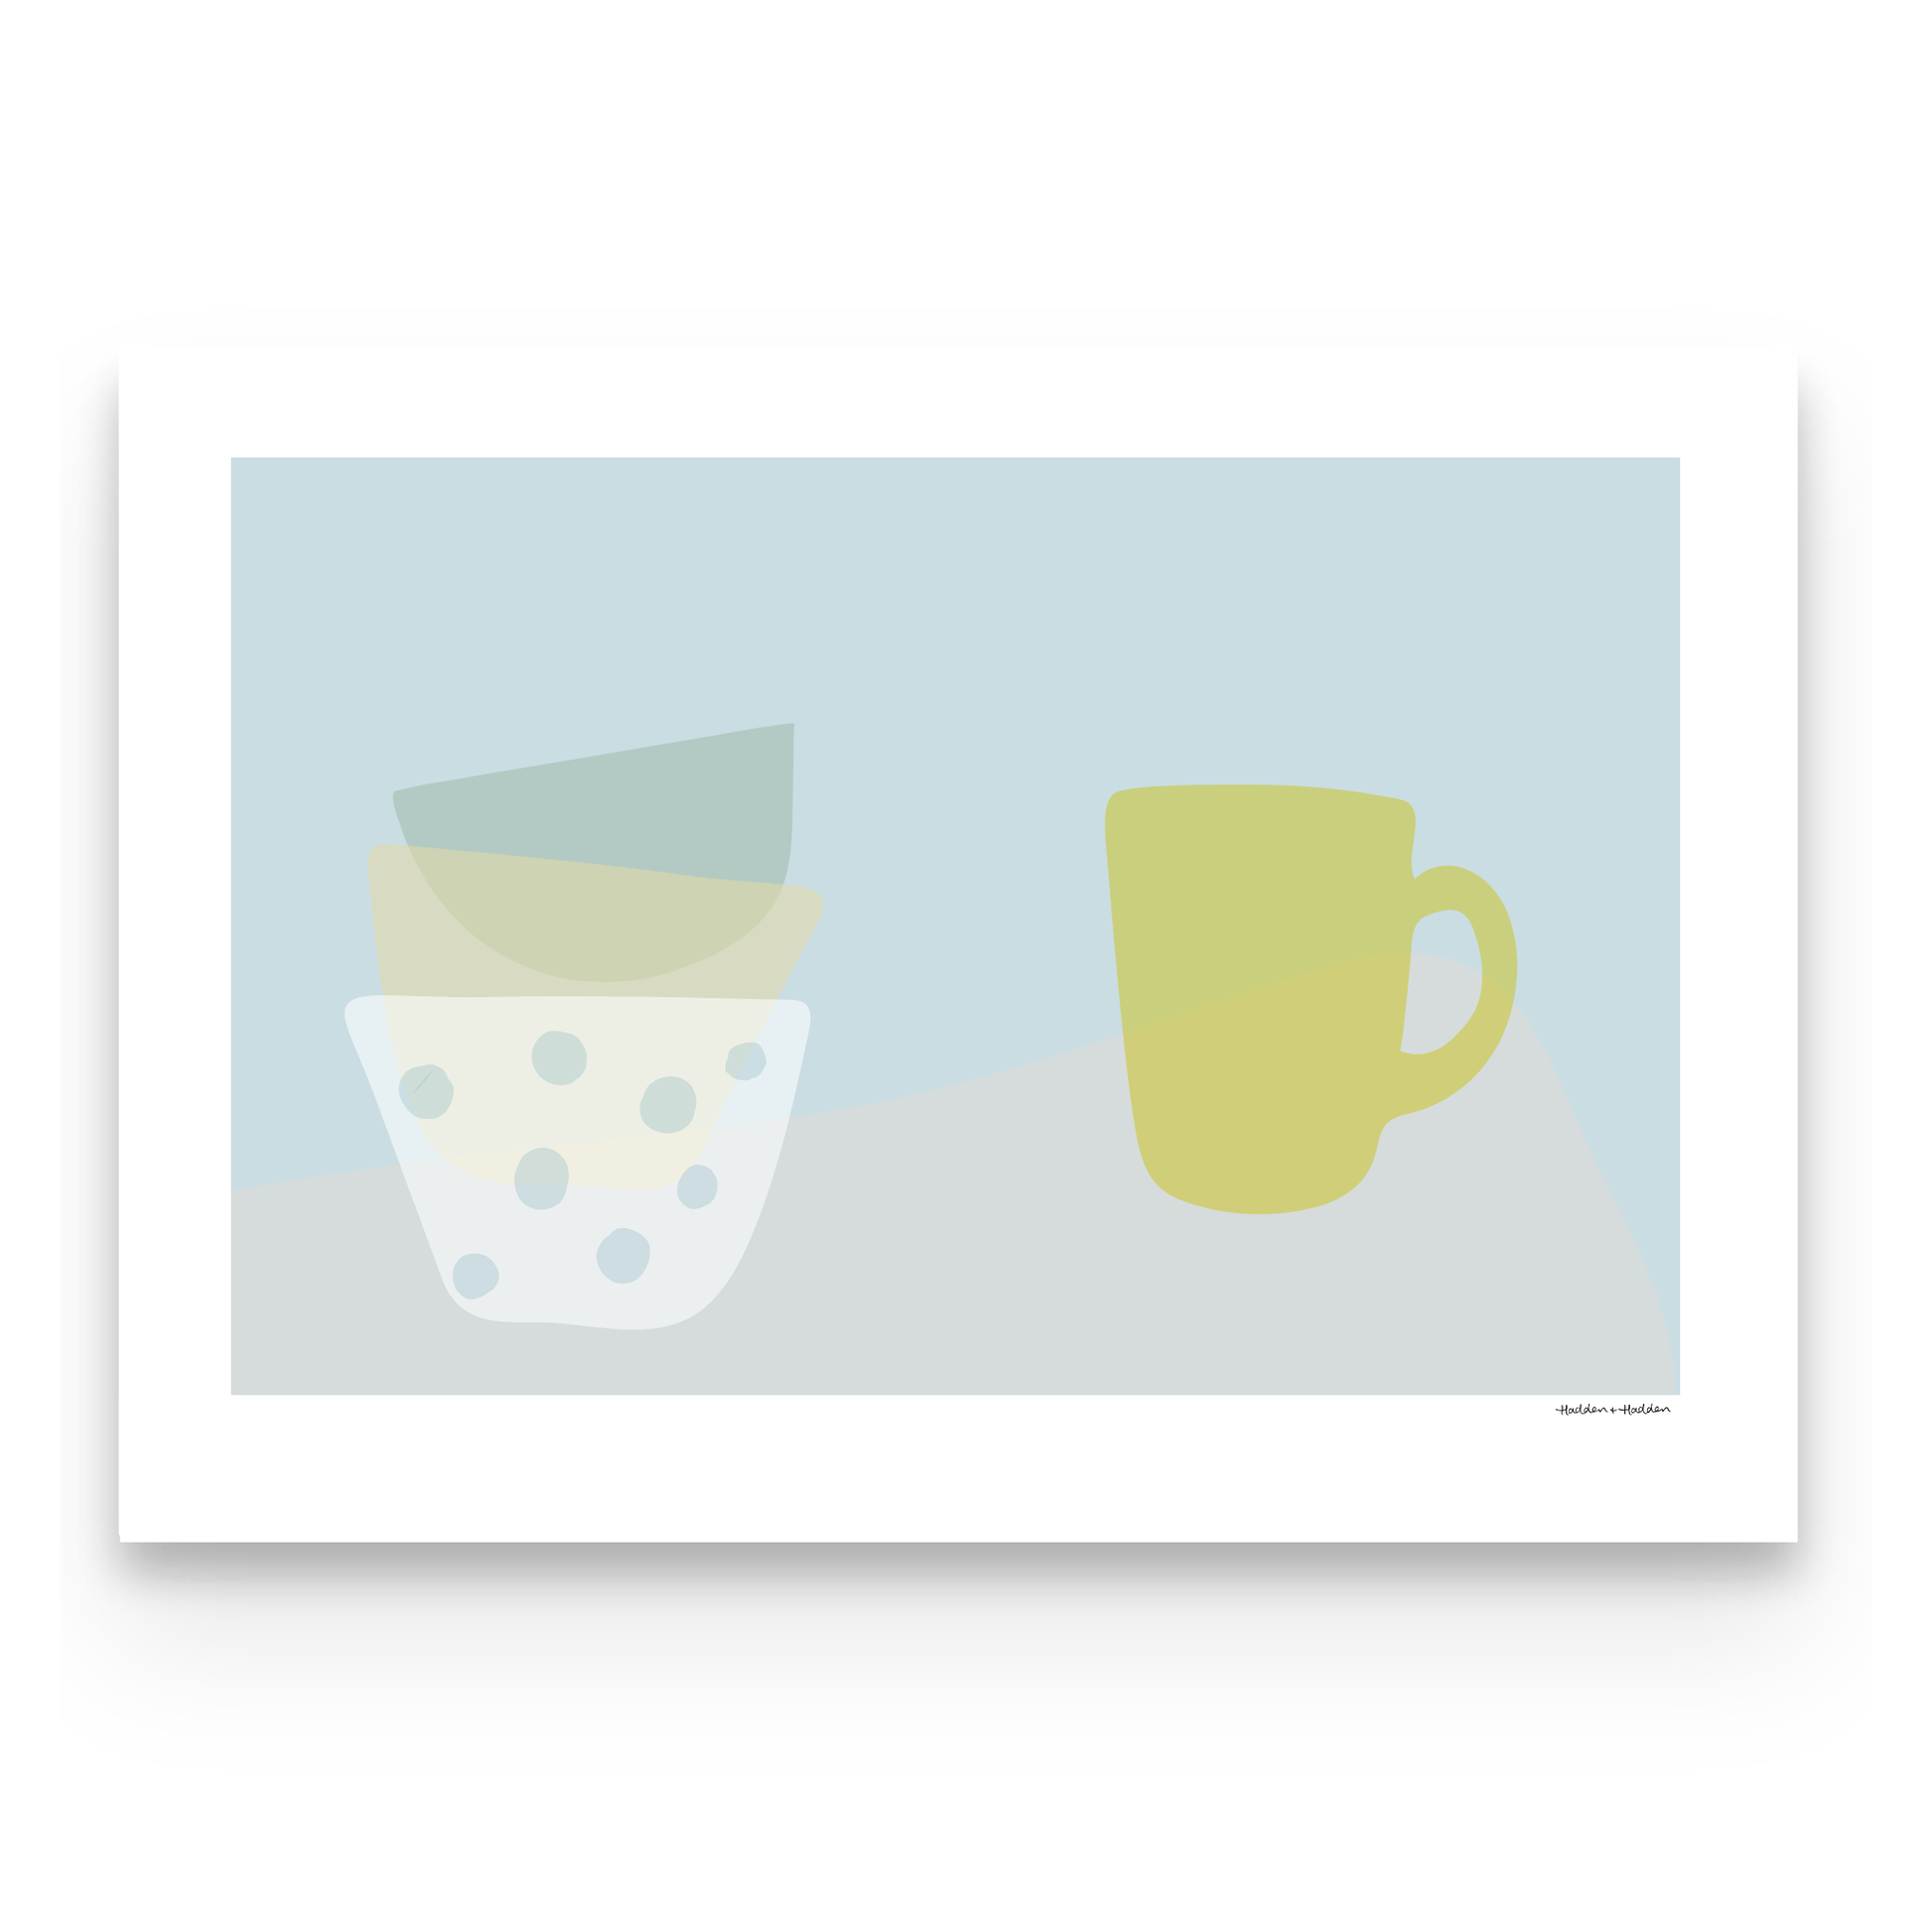 Misty Cups Framed Print by Hadden and Hadden